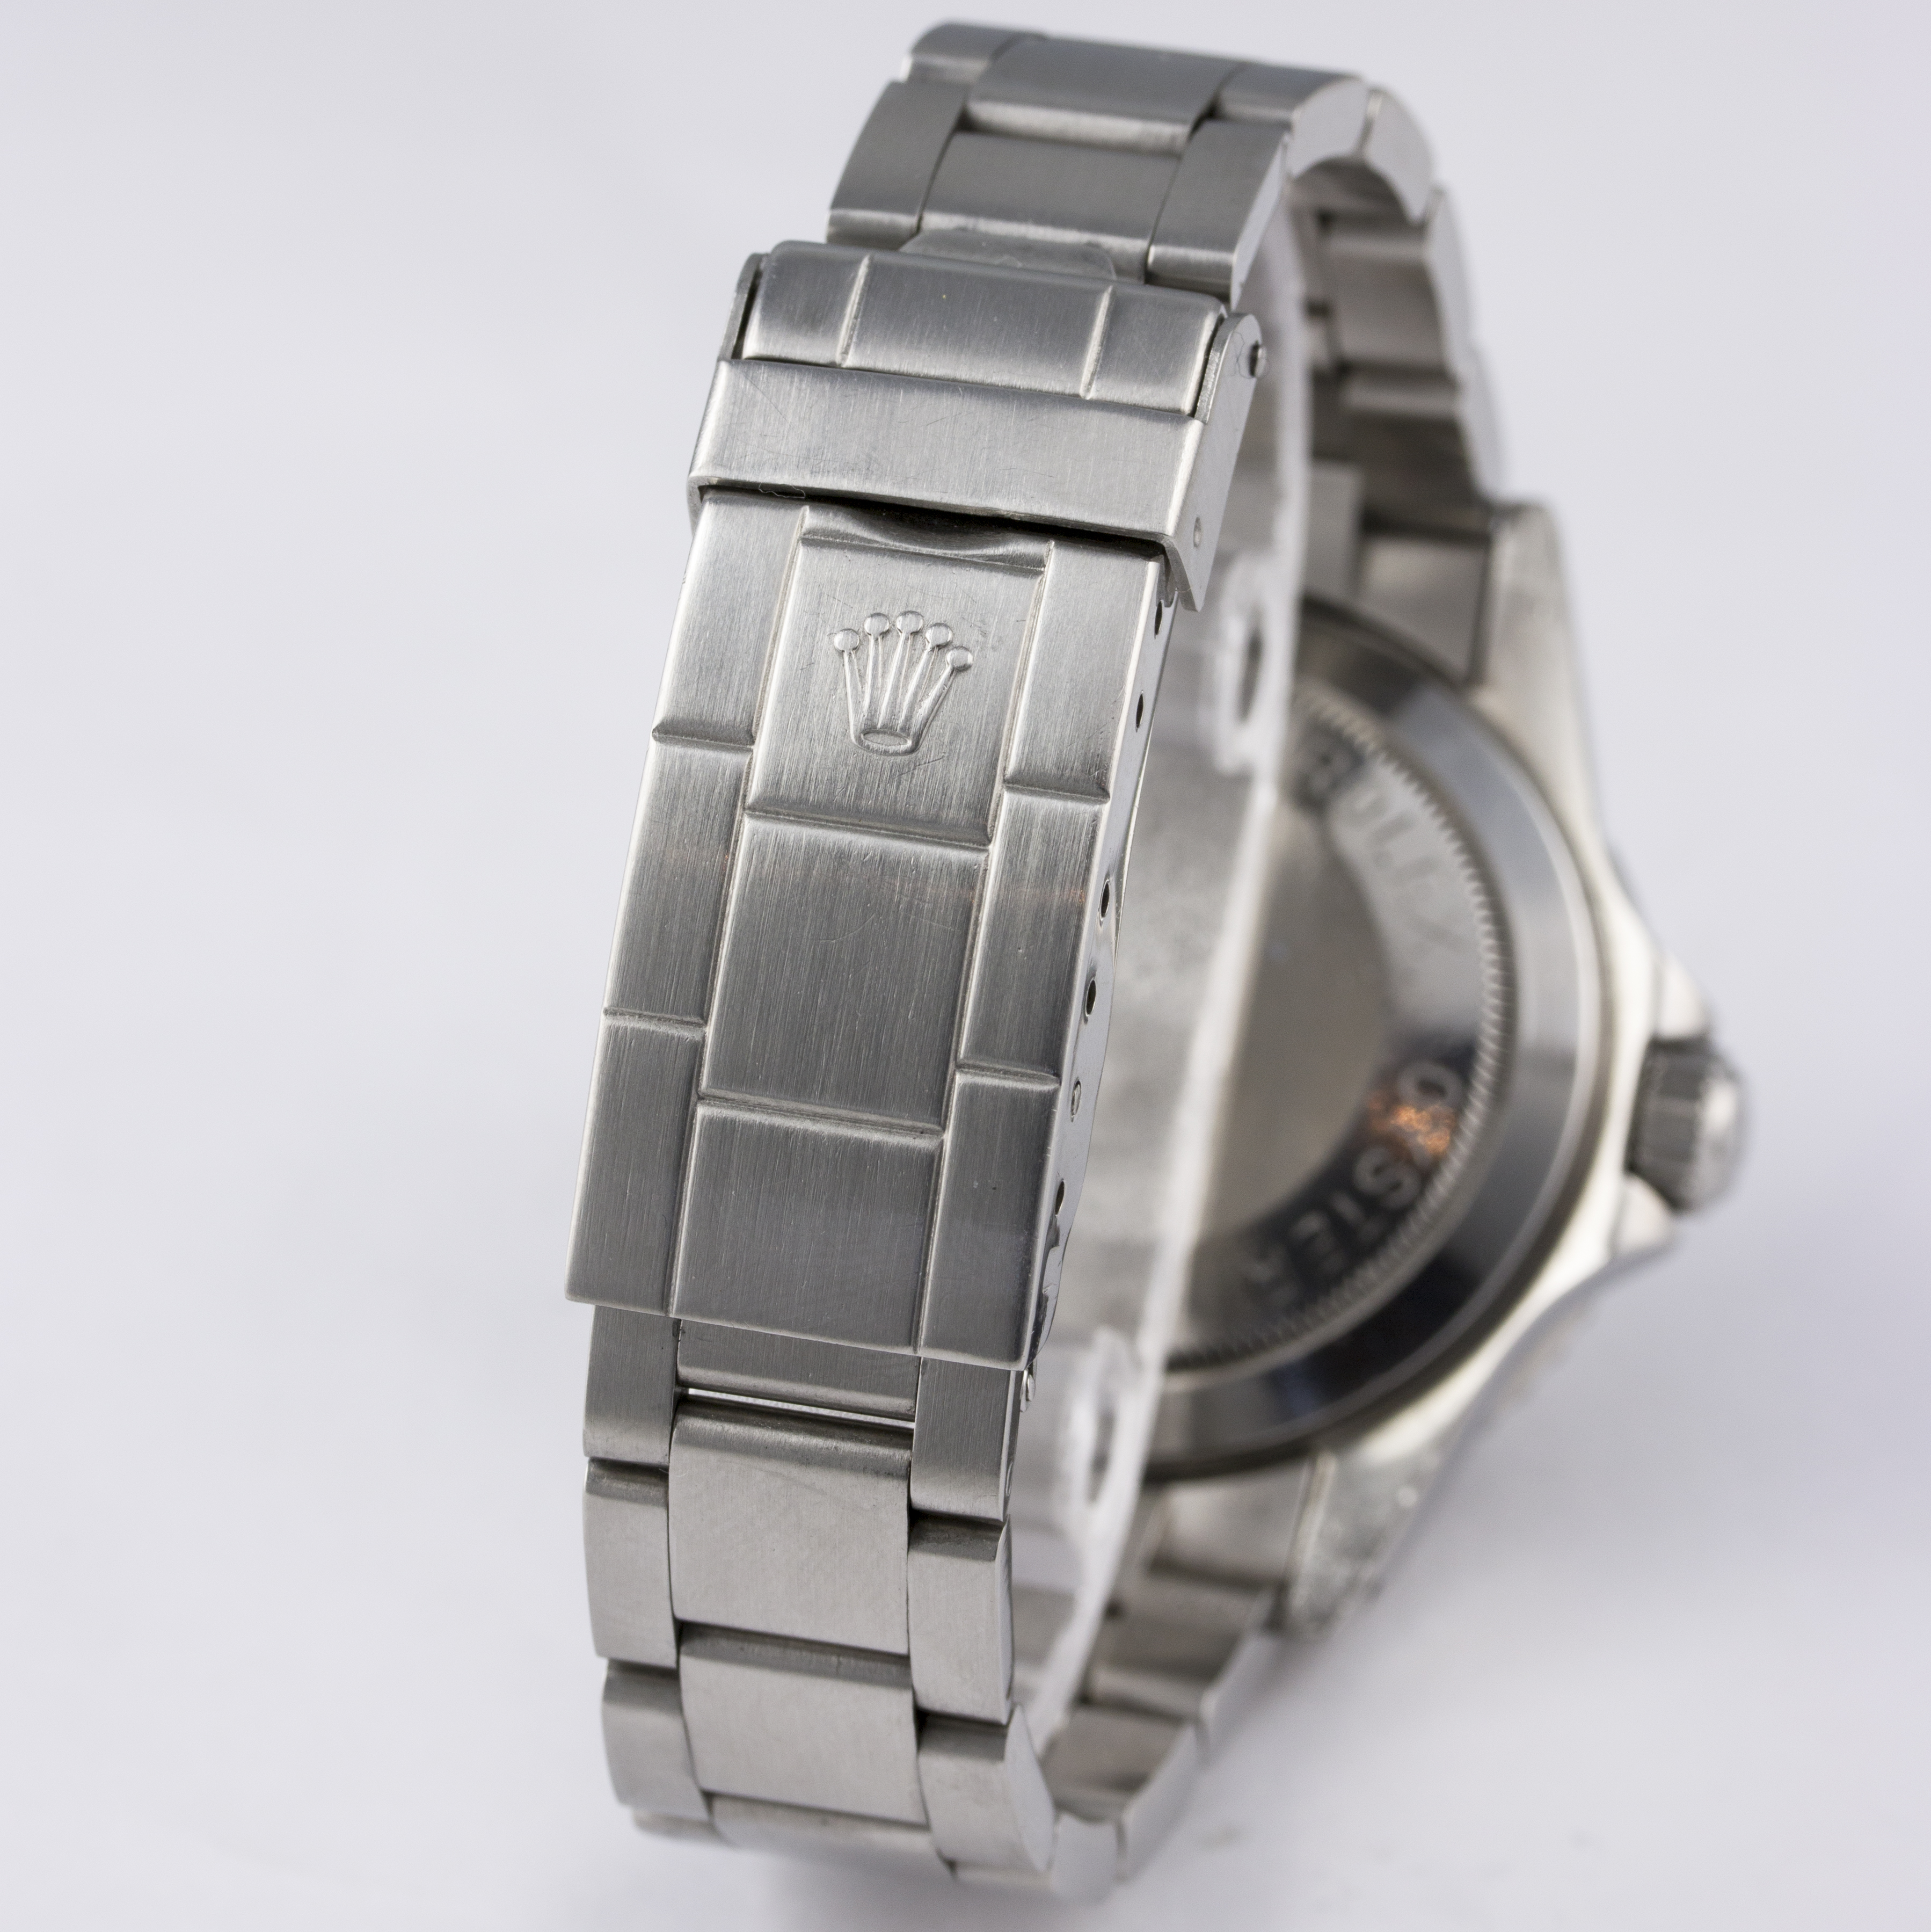 A RARE GENTLEMAN'S STAINLESS STEEL ROLEX OYSTER PERPETUAL DATE SEA DWELLER BRACELET WATCH CIRCA - Image 7 of 8